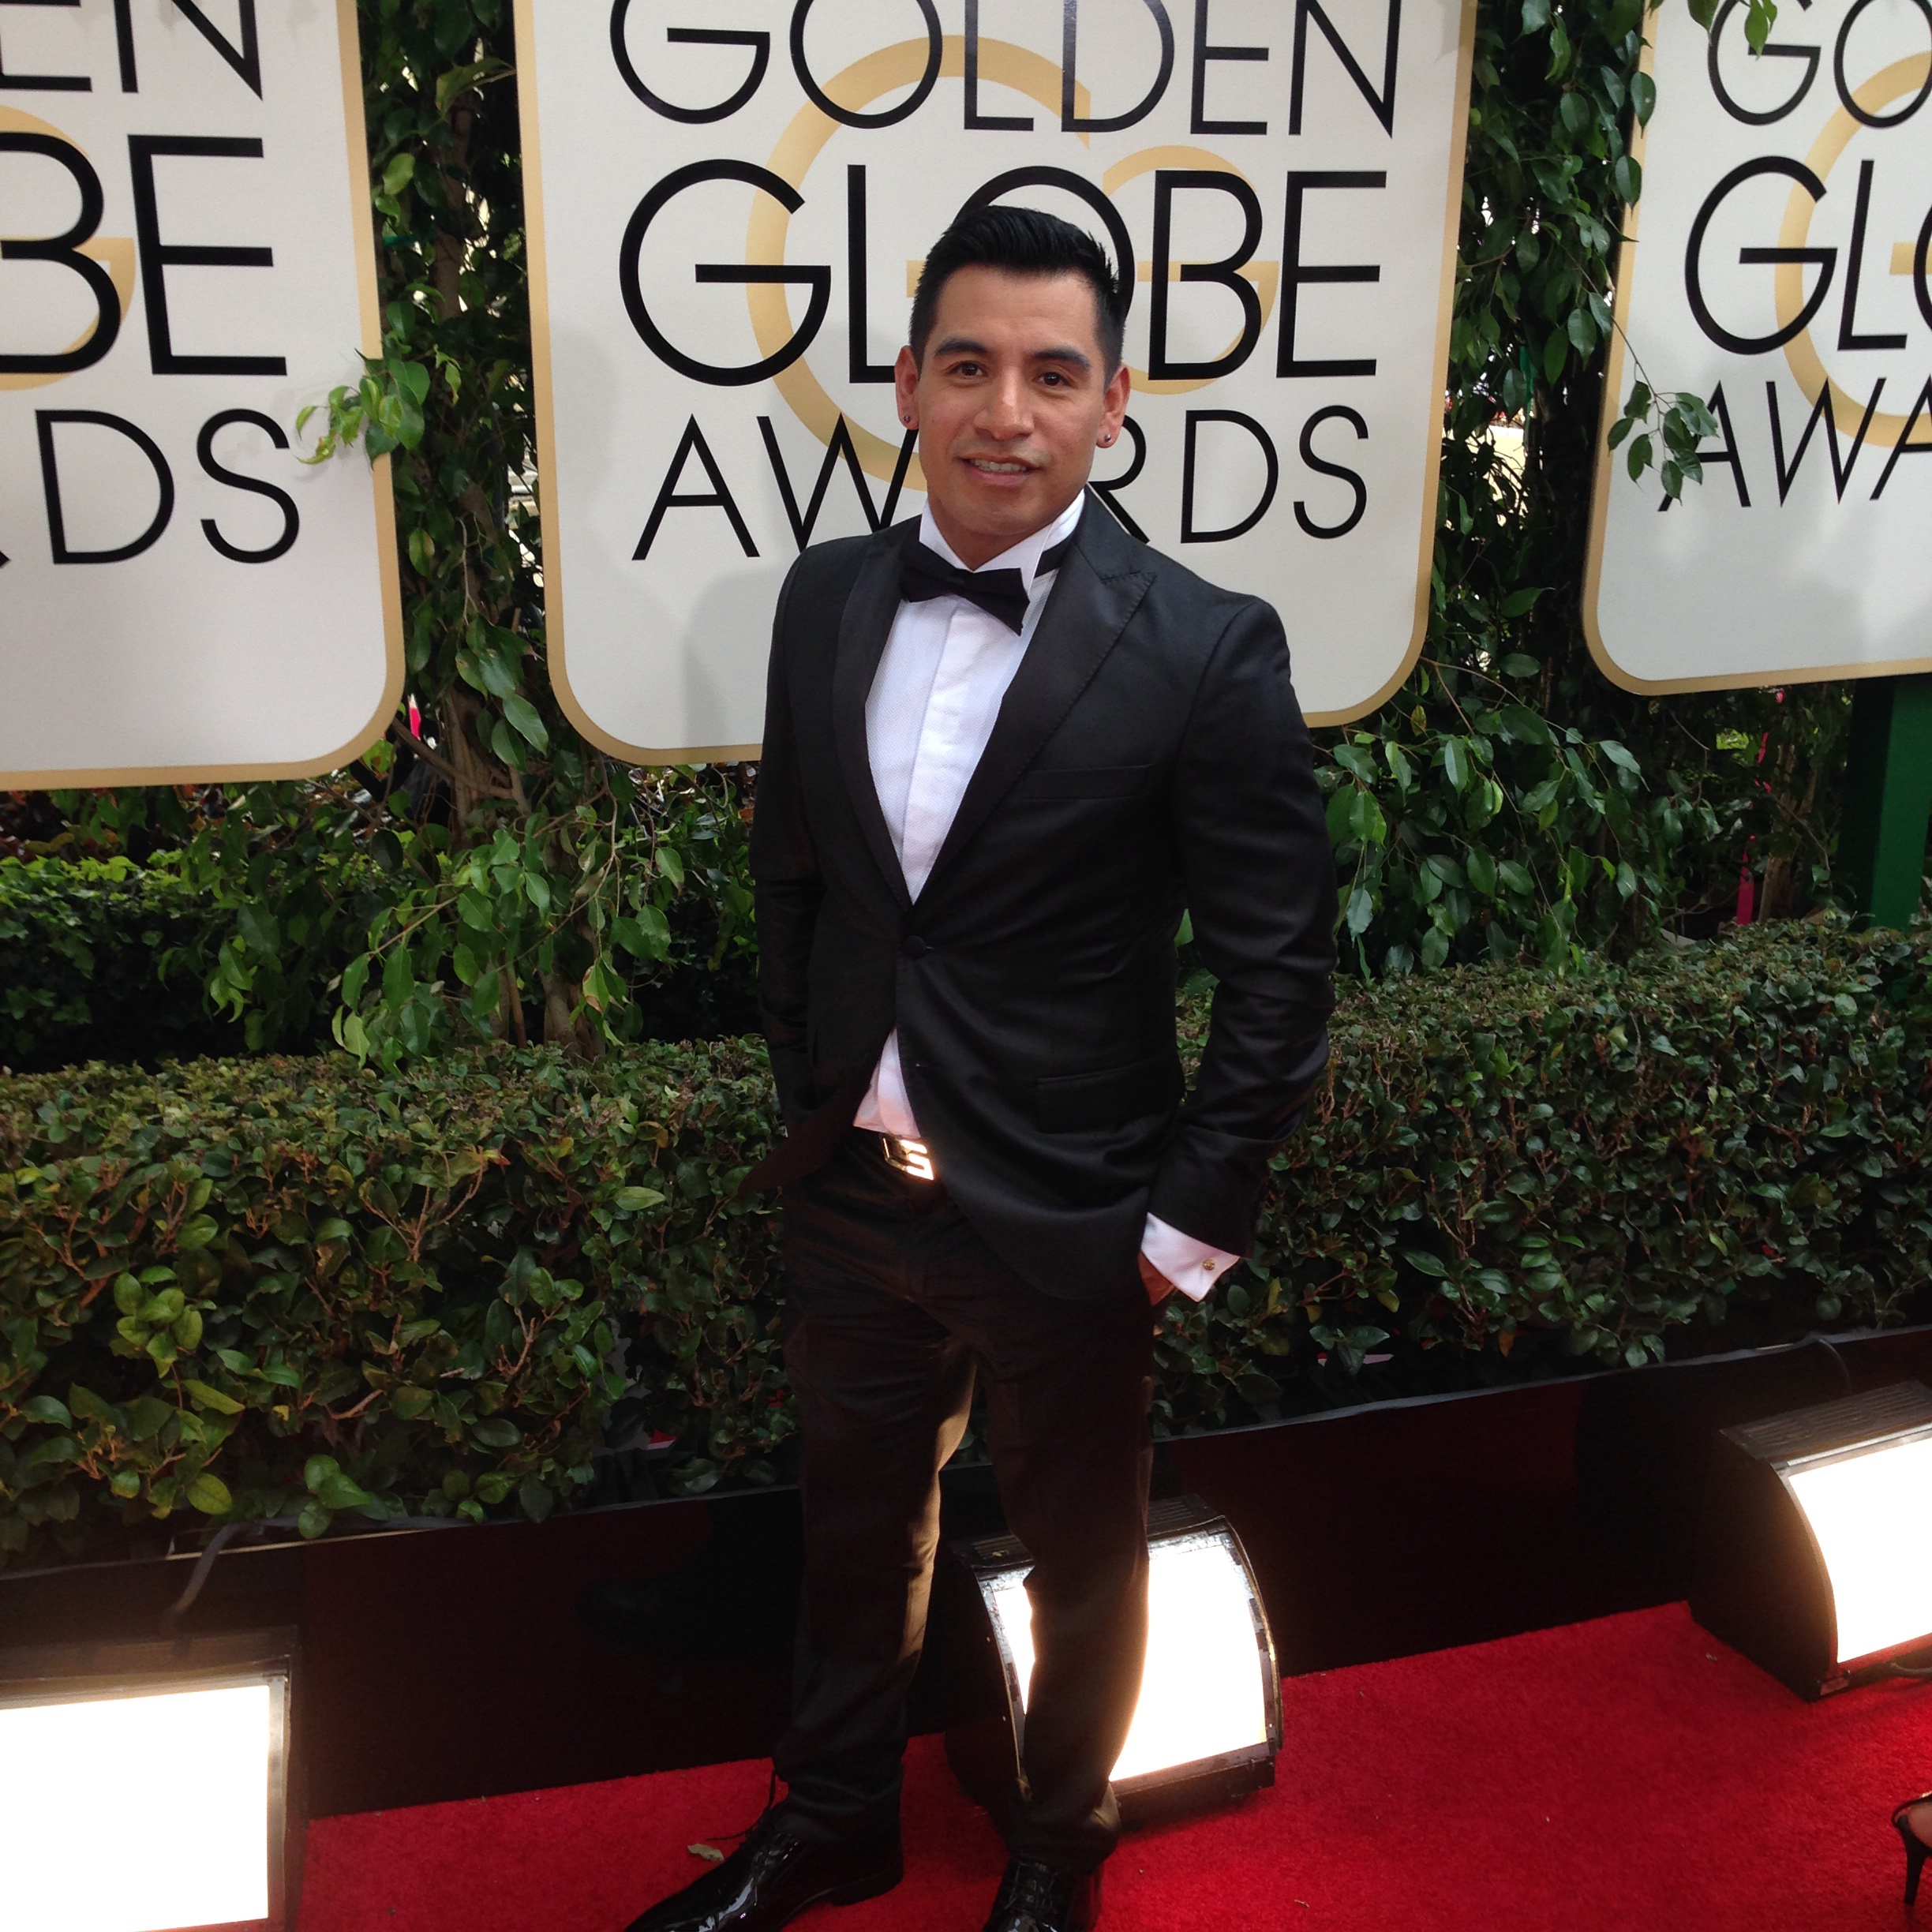 Actor Eloy Mendez attends The 2014 Golden Globe Awards.